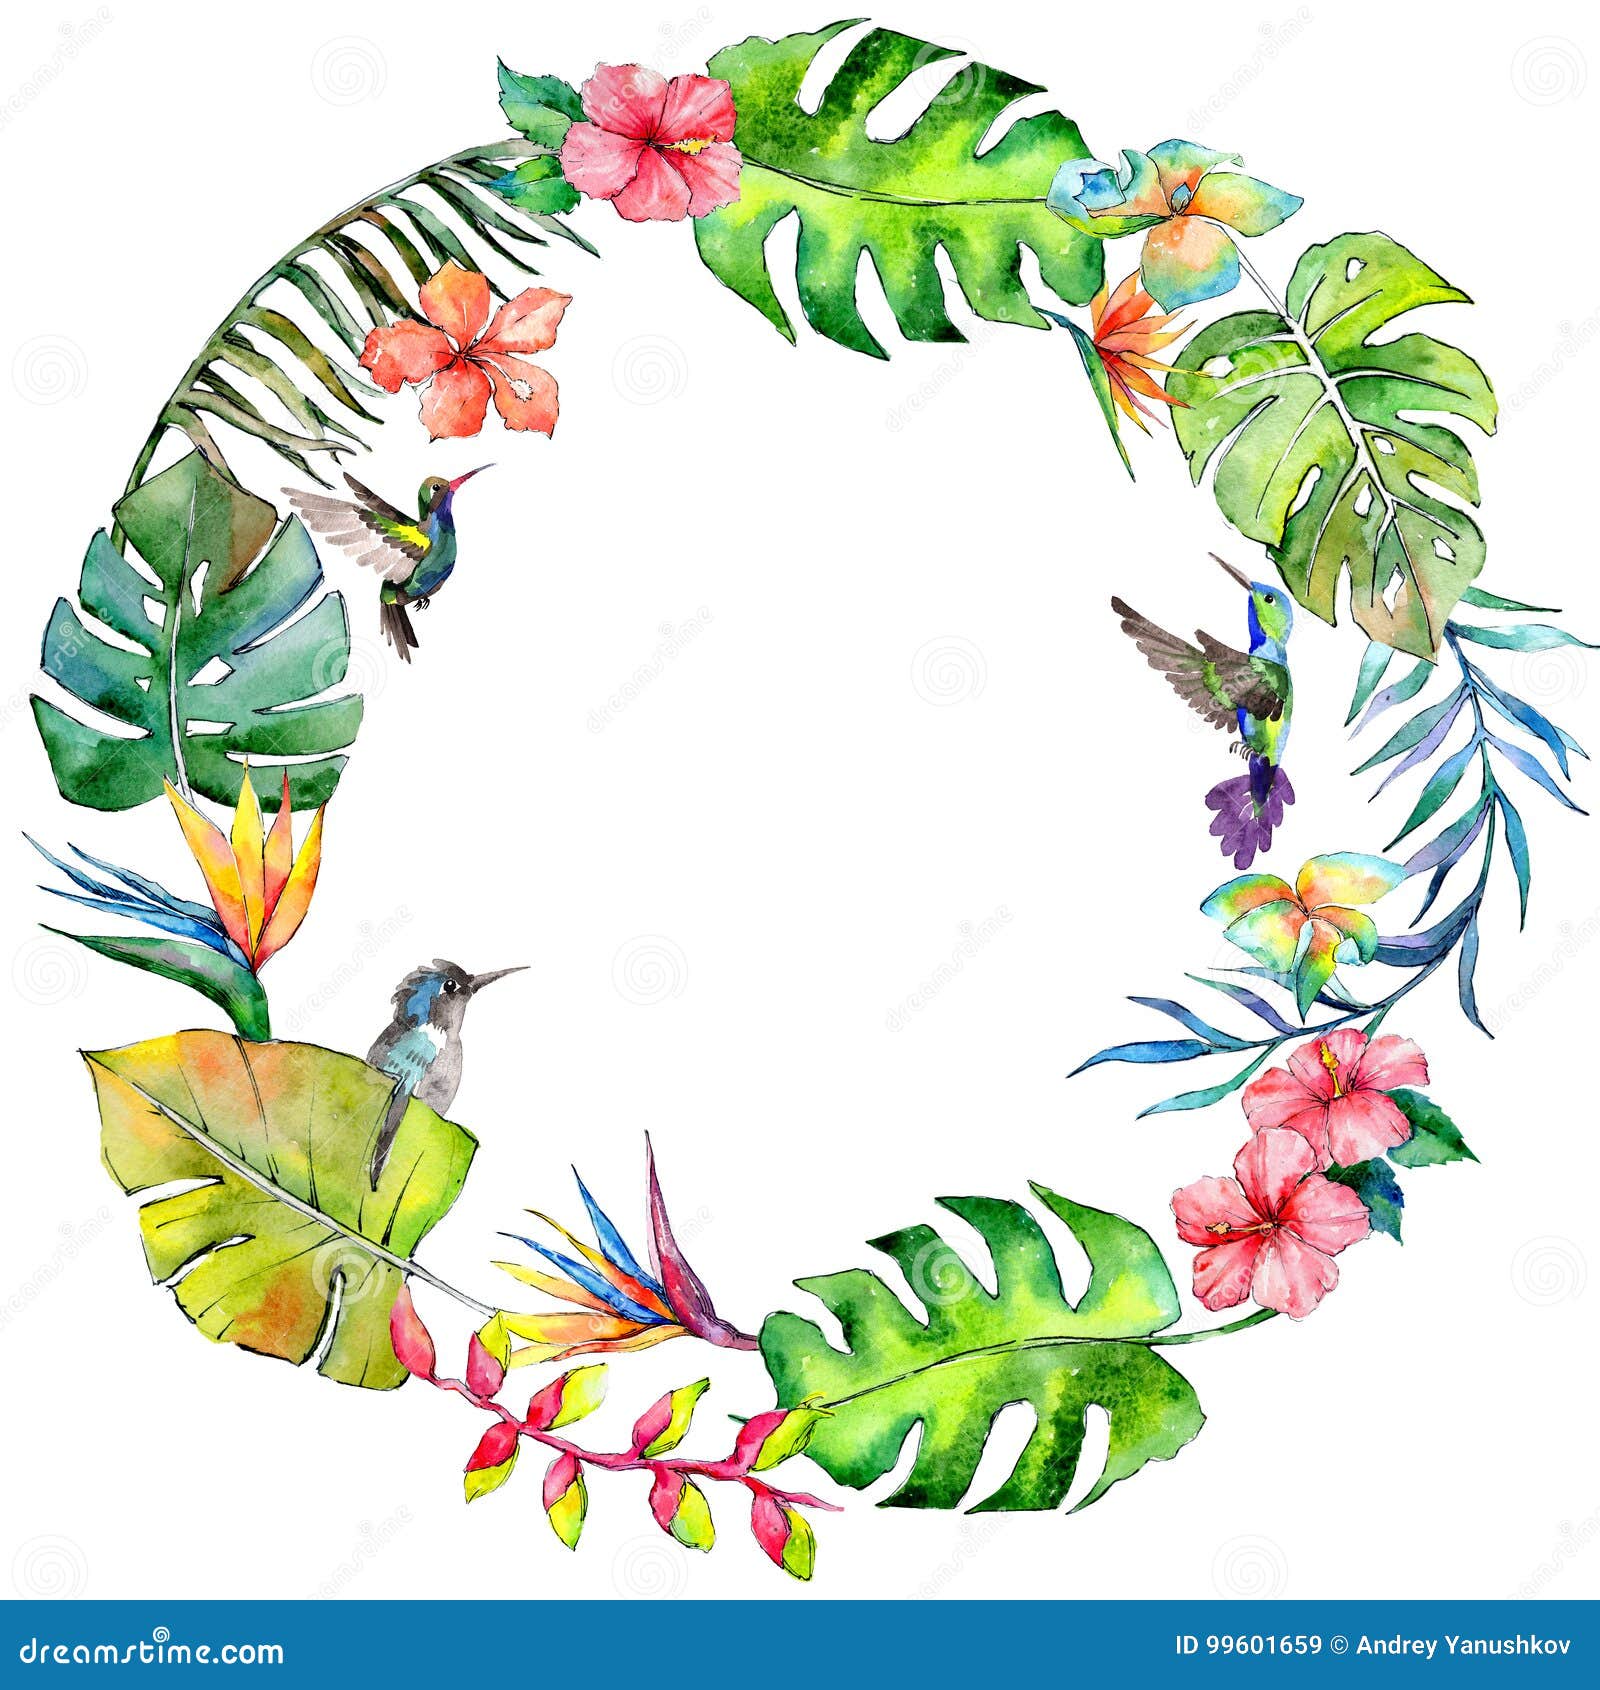 Tropical Hawaii Leaves Wreath in a Watercolor Style. Stock Illustration ...